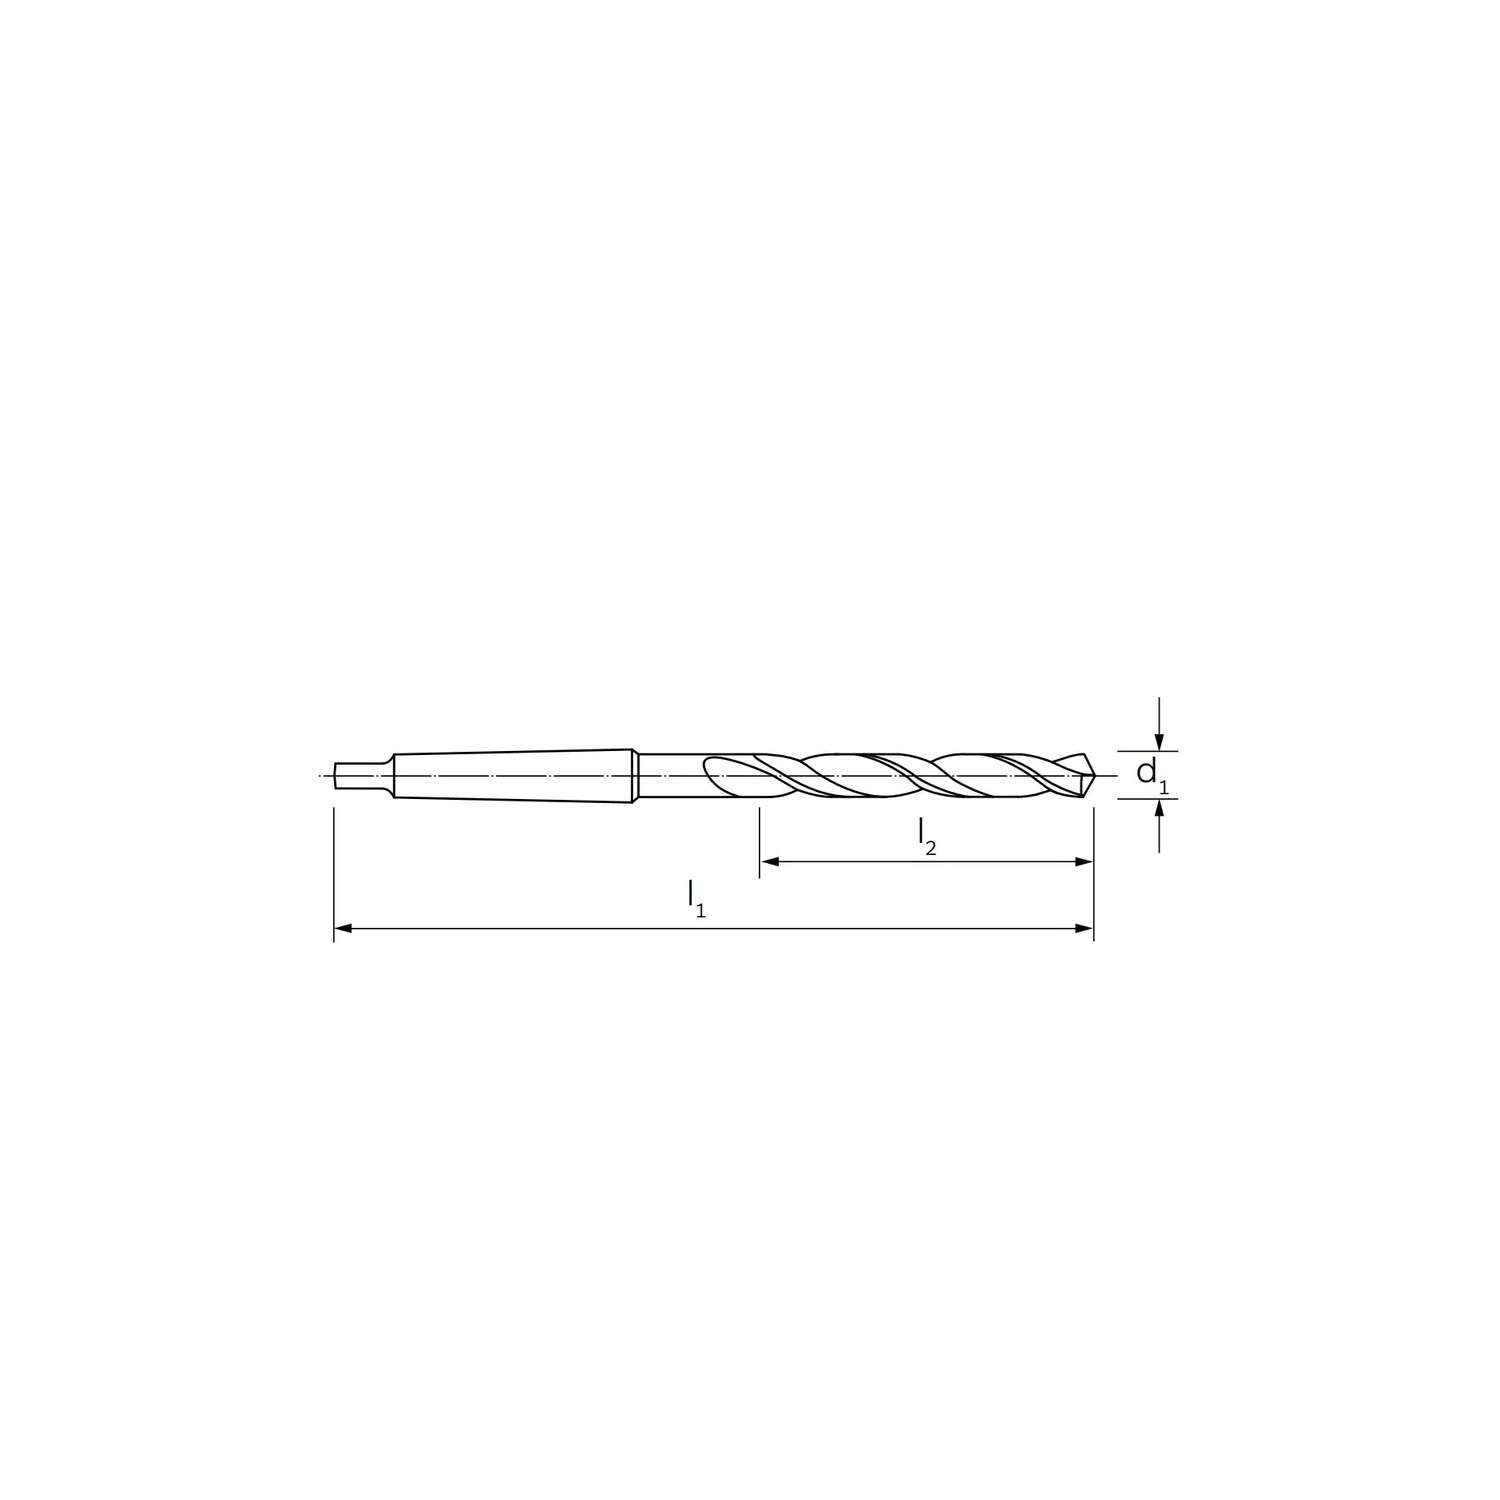 Specific helical conical tip for aluminium DIN 345 type W 13 - ILIX